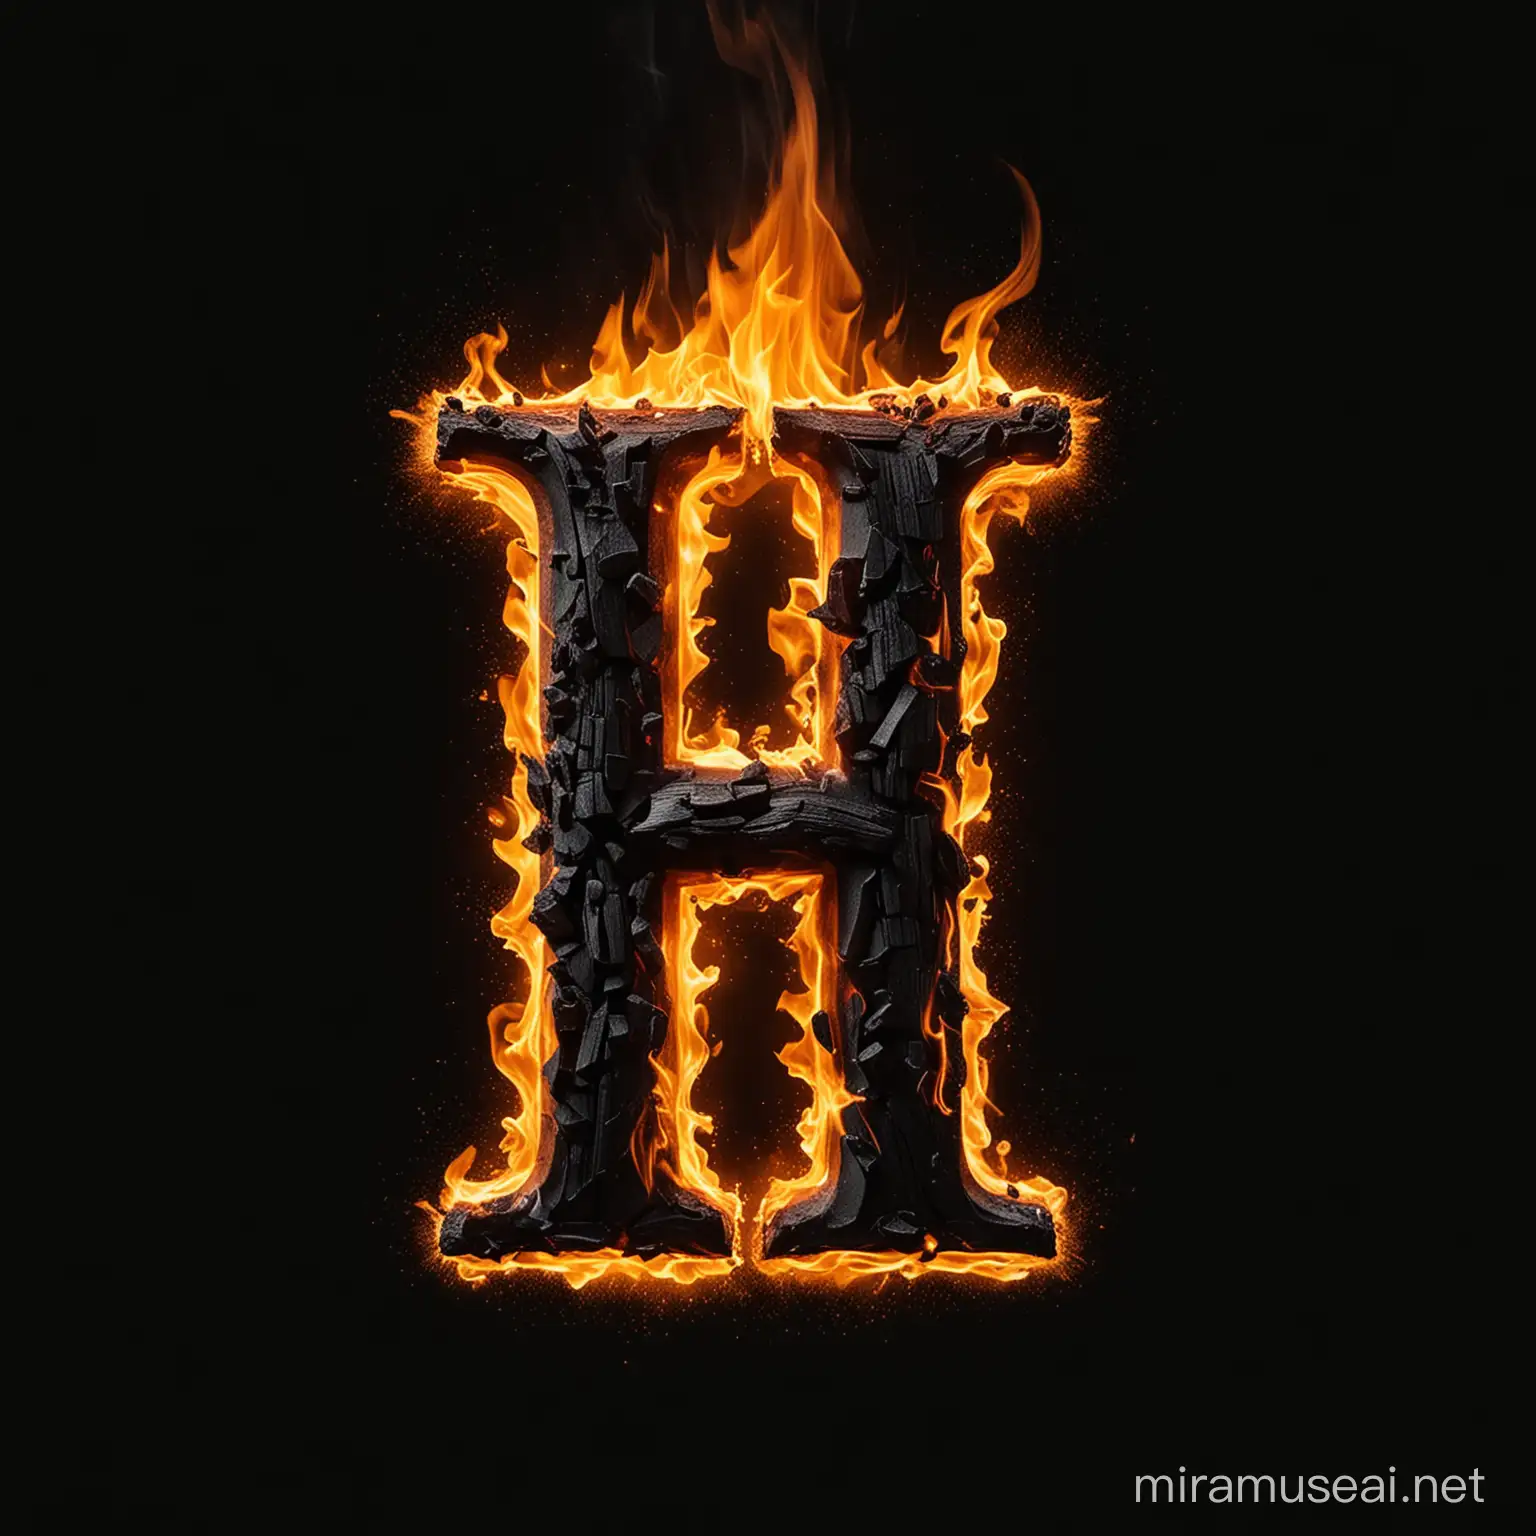 The capital letter H on fire with a black background